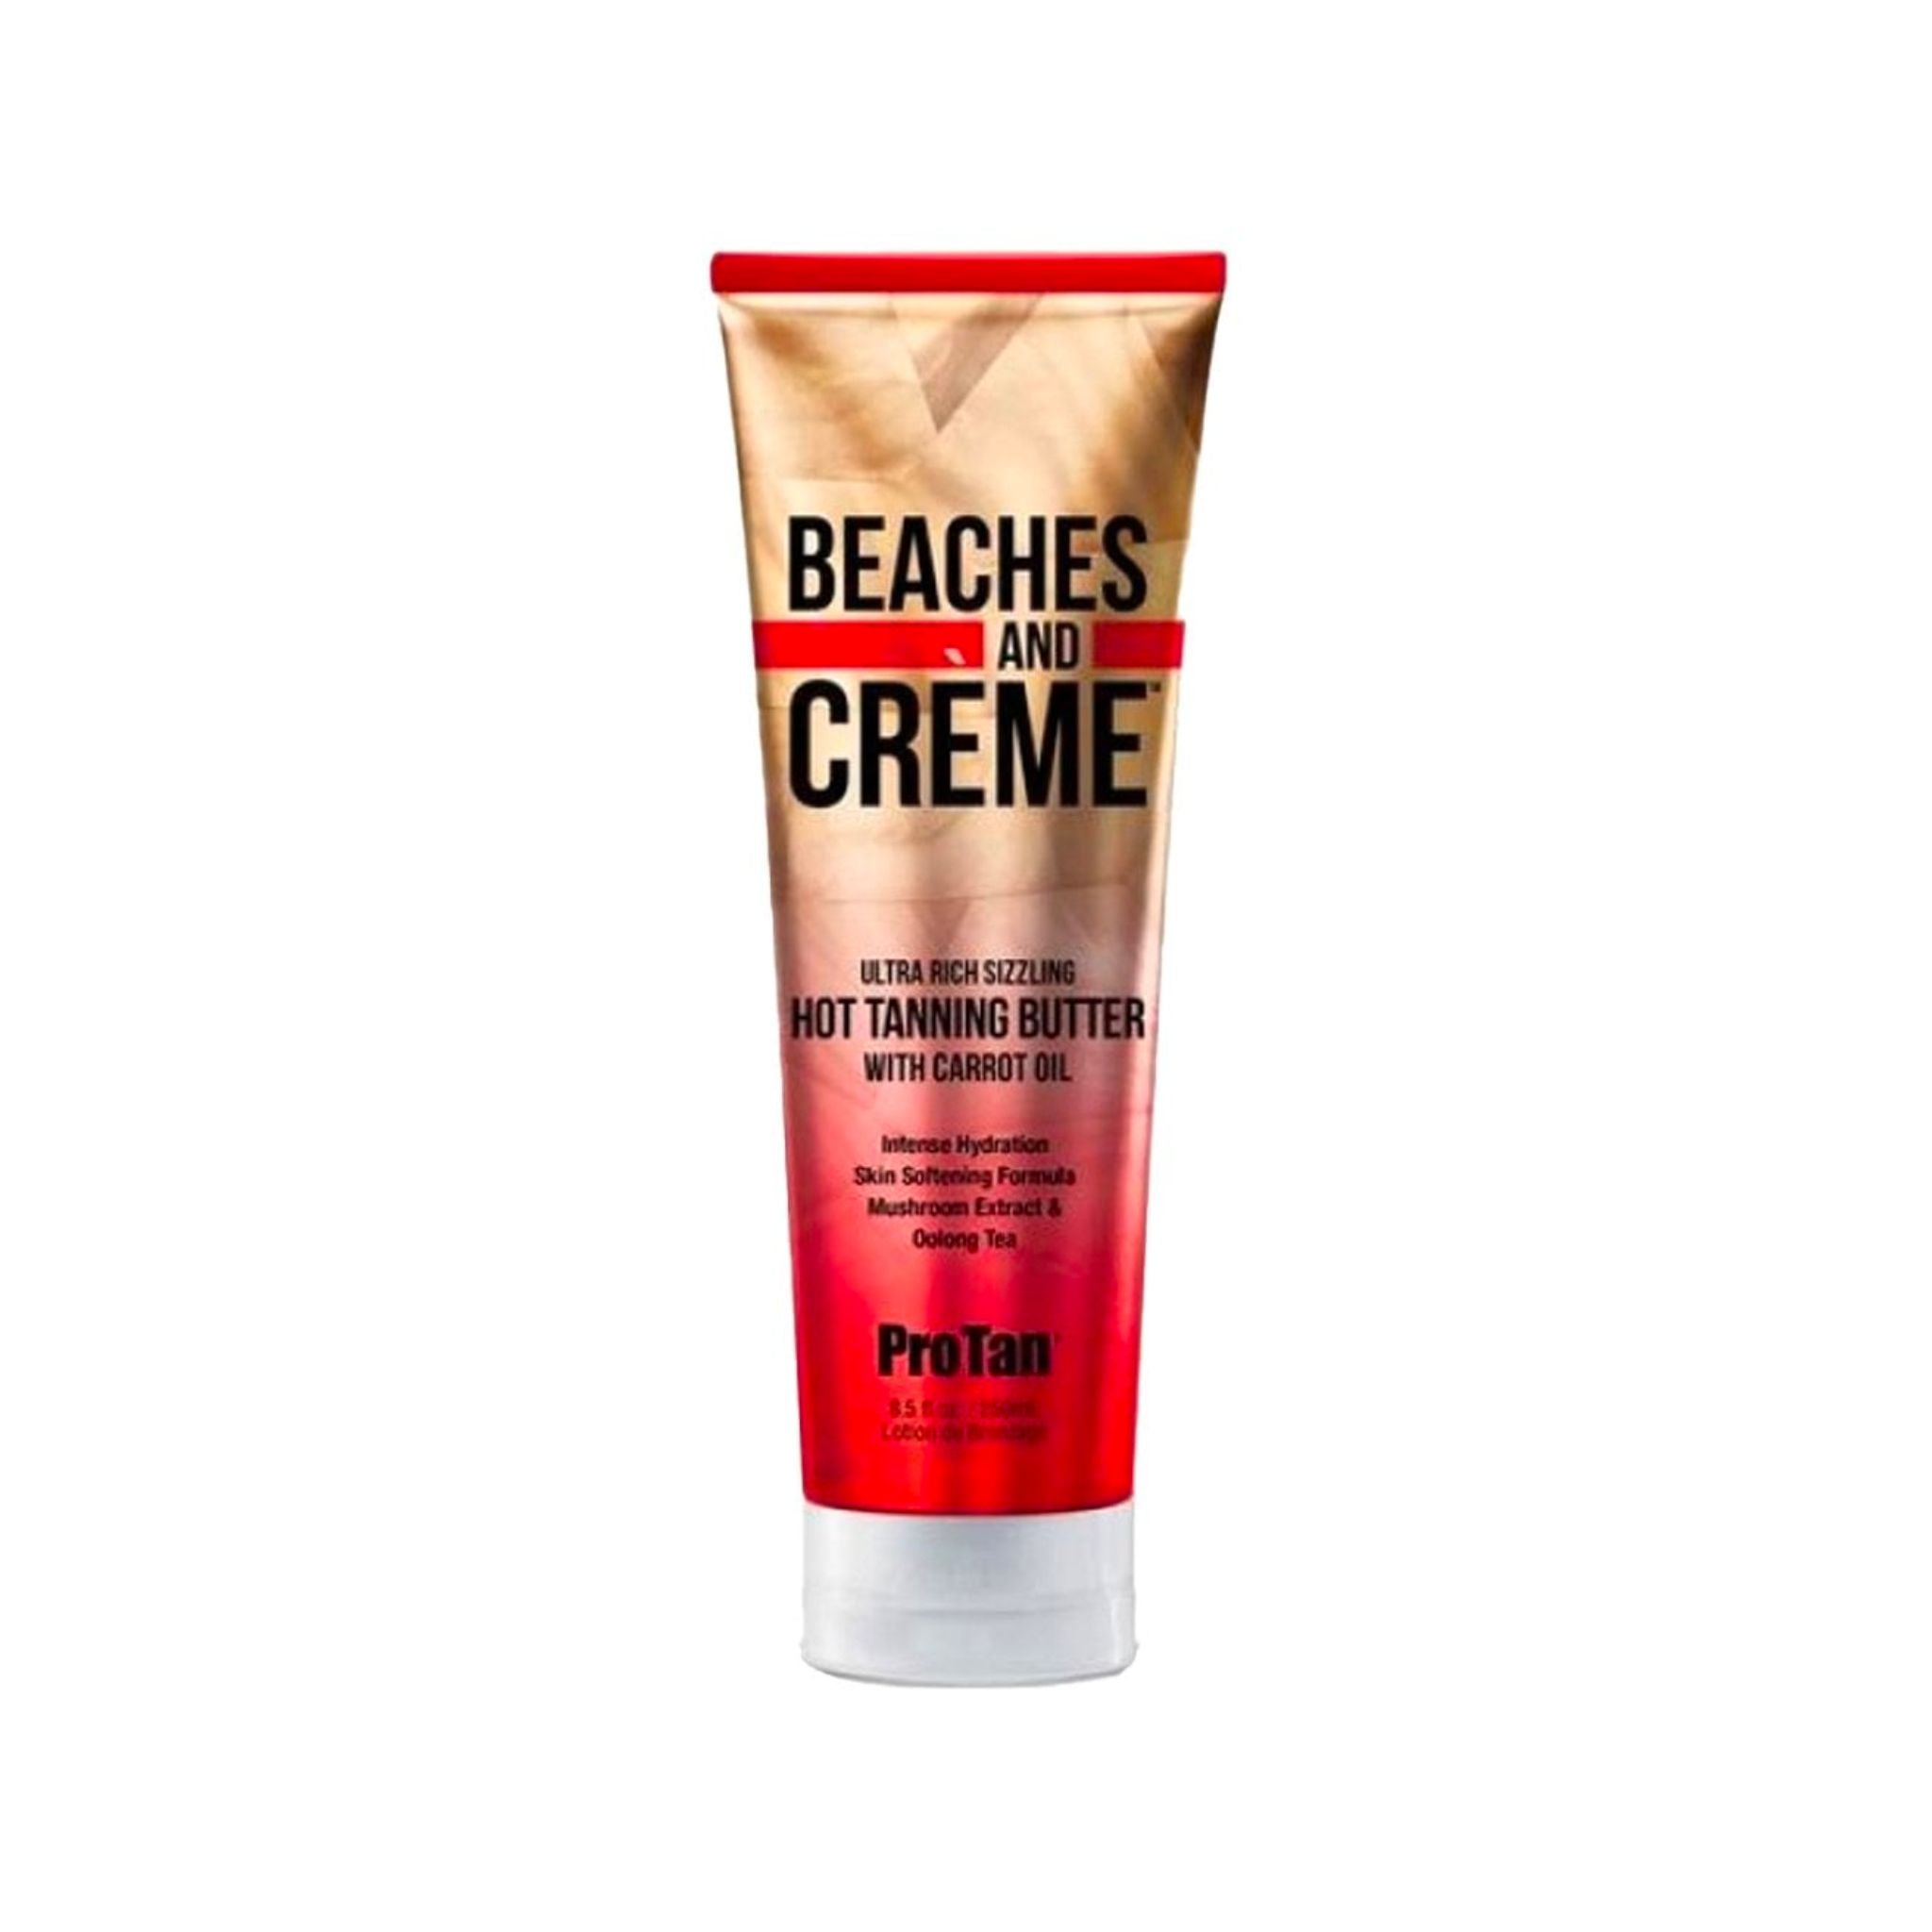 ProTan Beaches & Créme Sizzling Butter Tanning Lotion